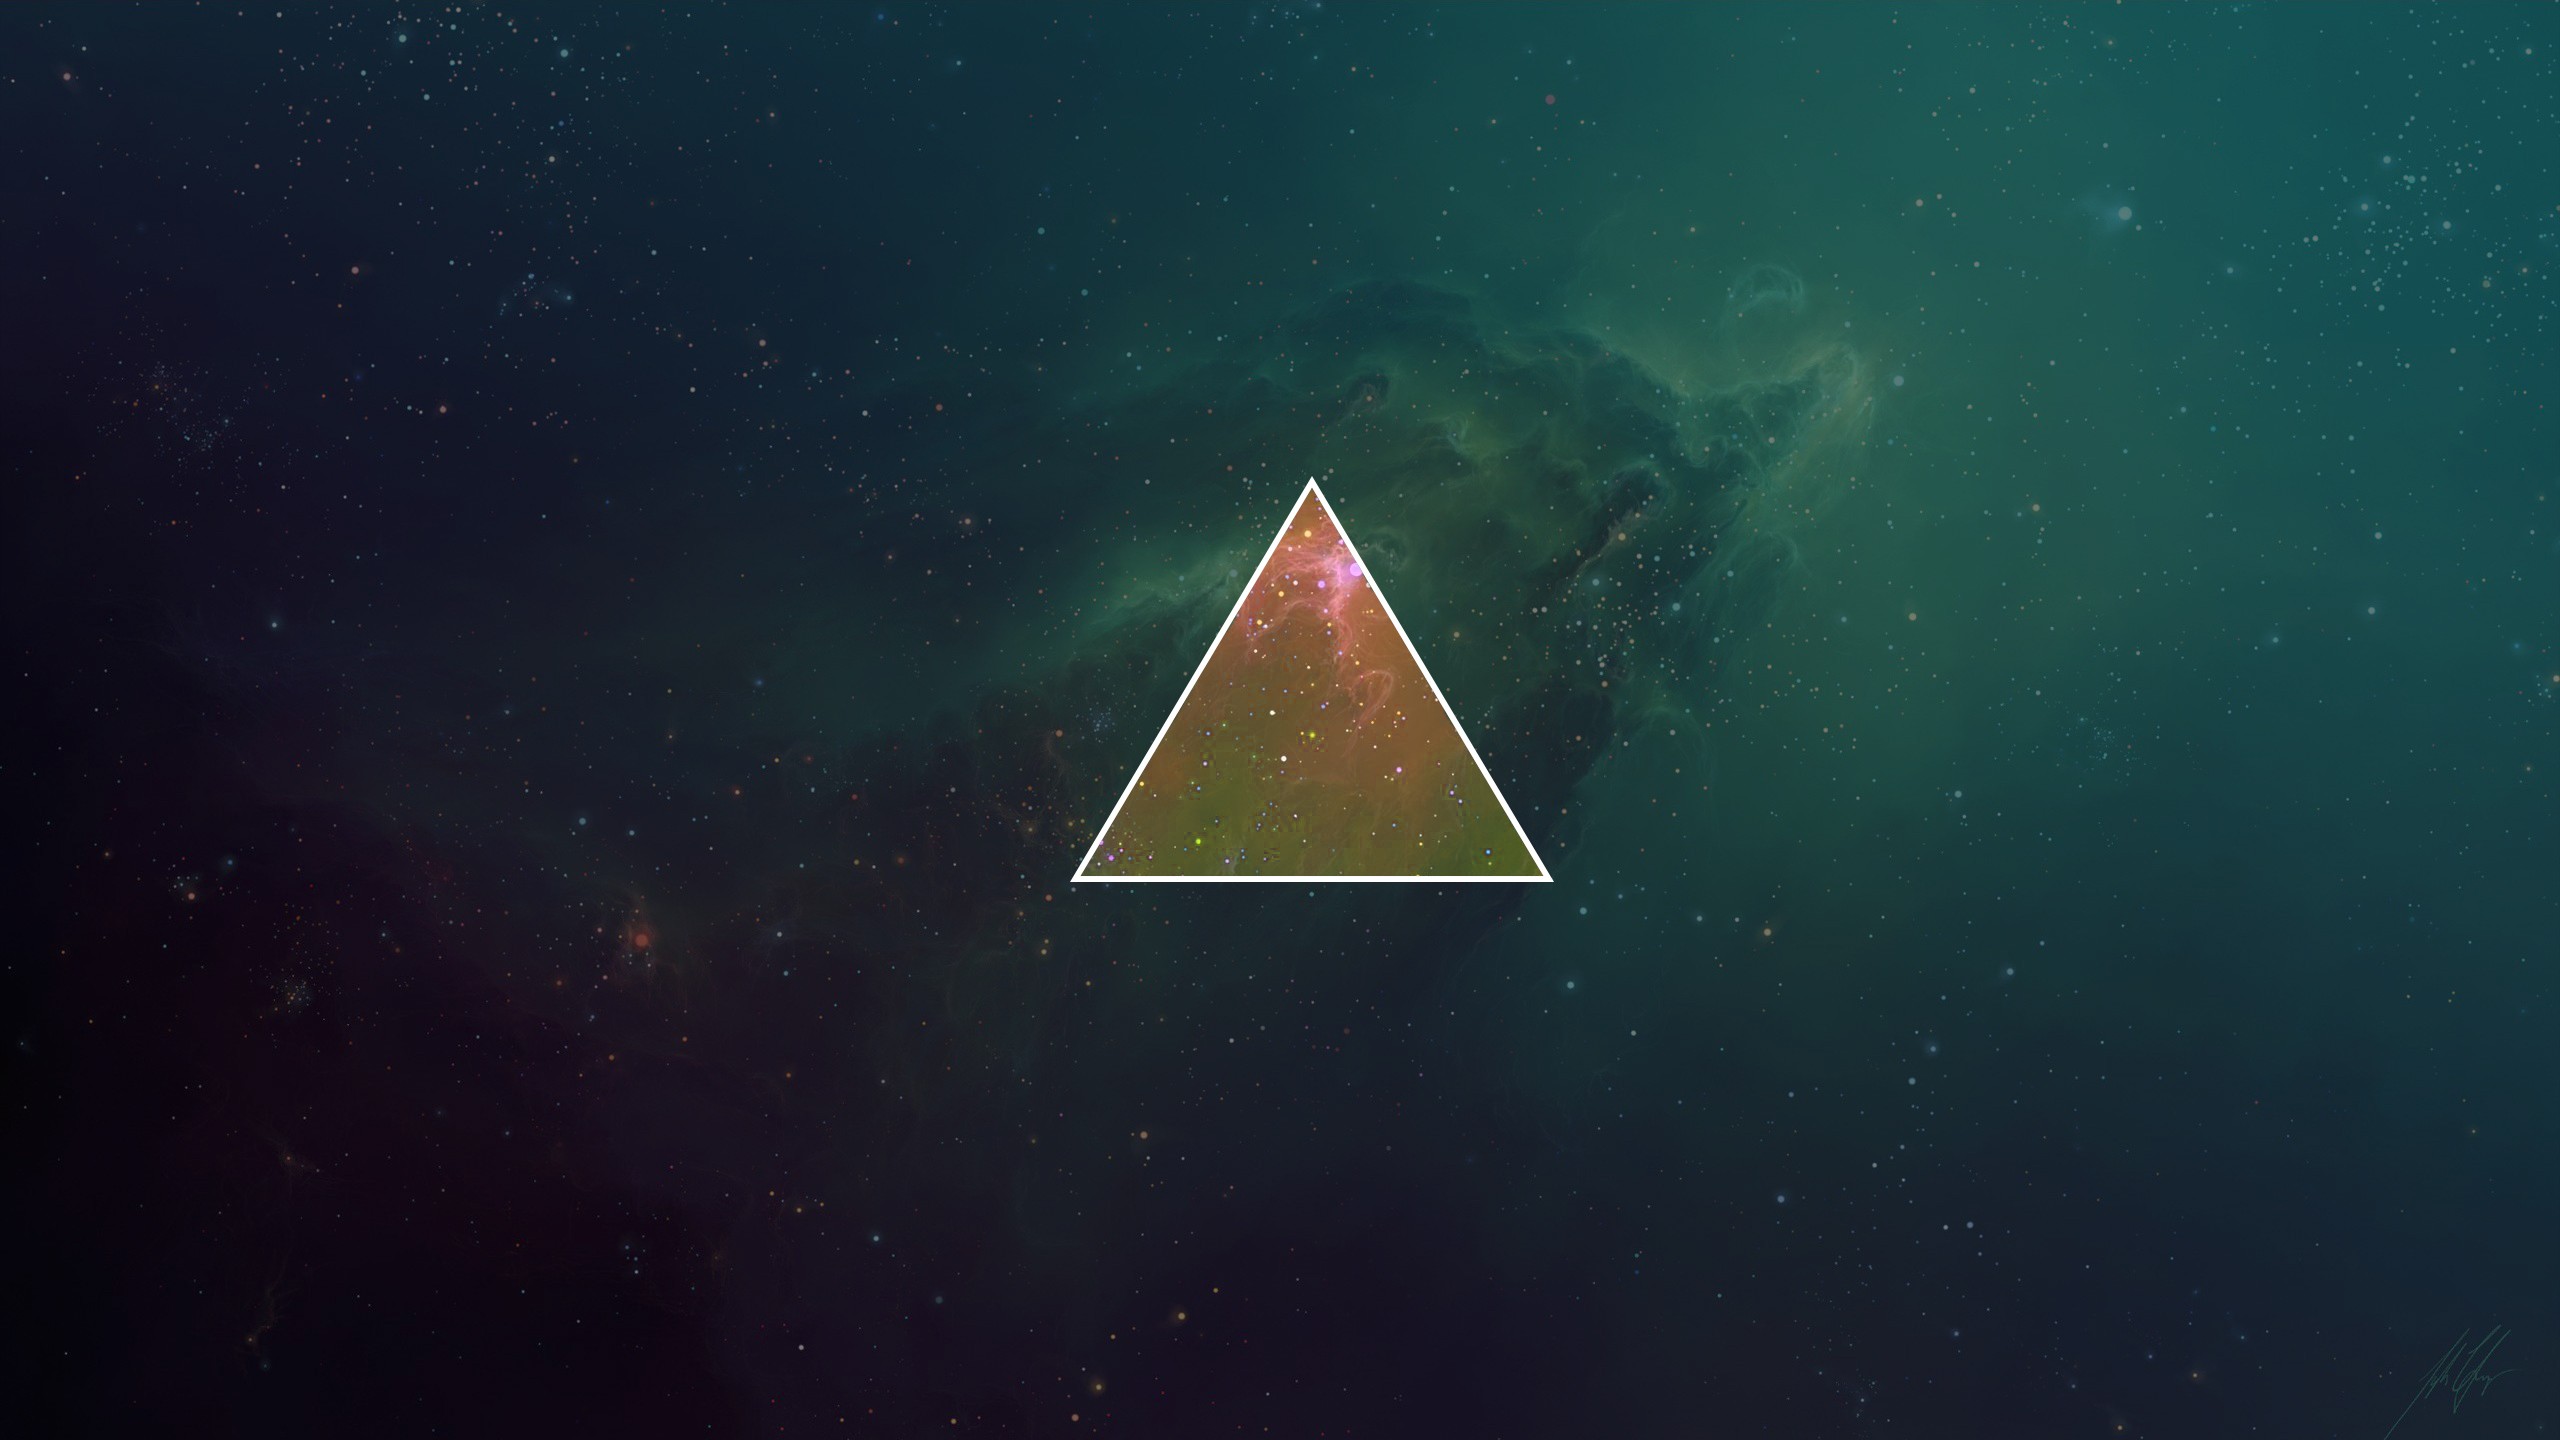 Abstract Triangle Space Background Desktop Wallpaper